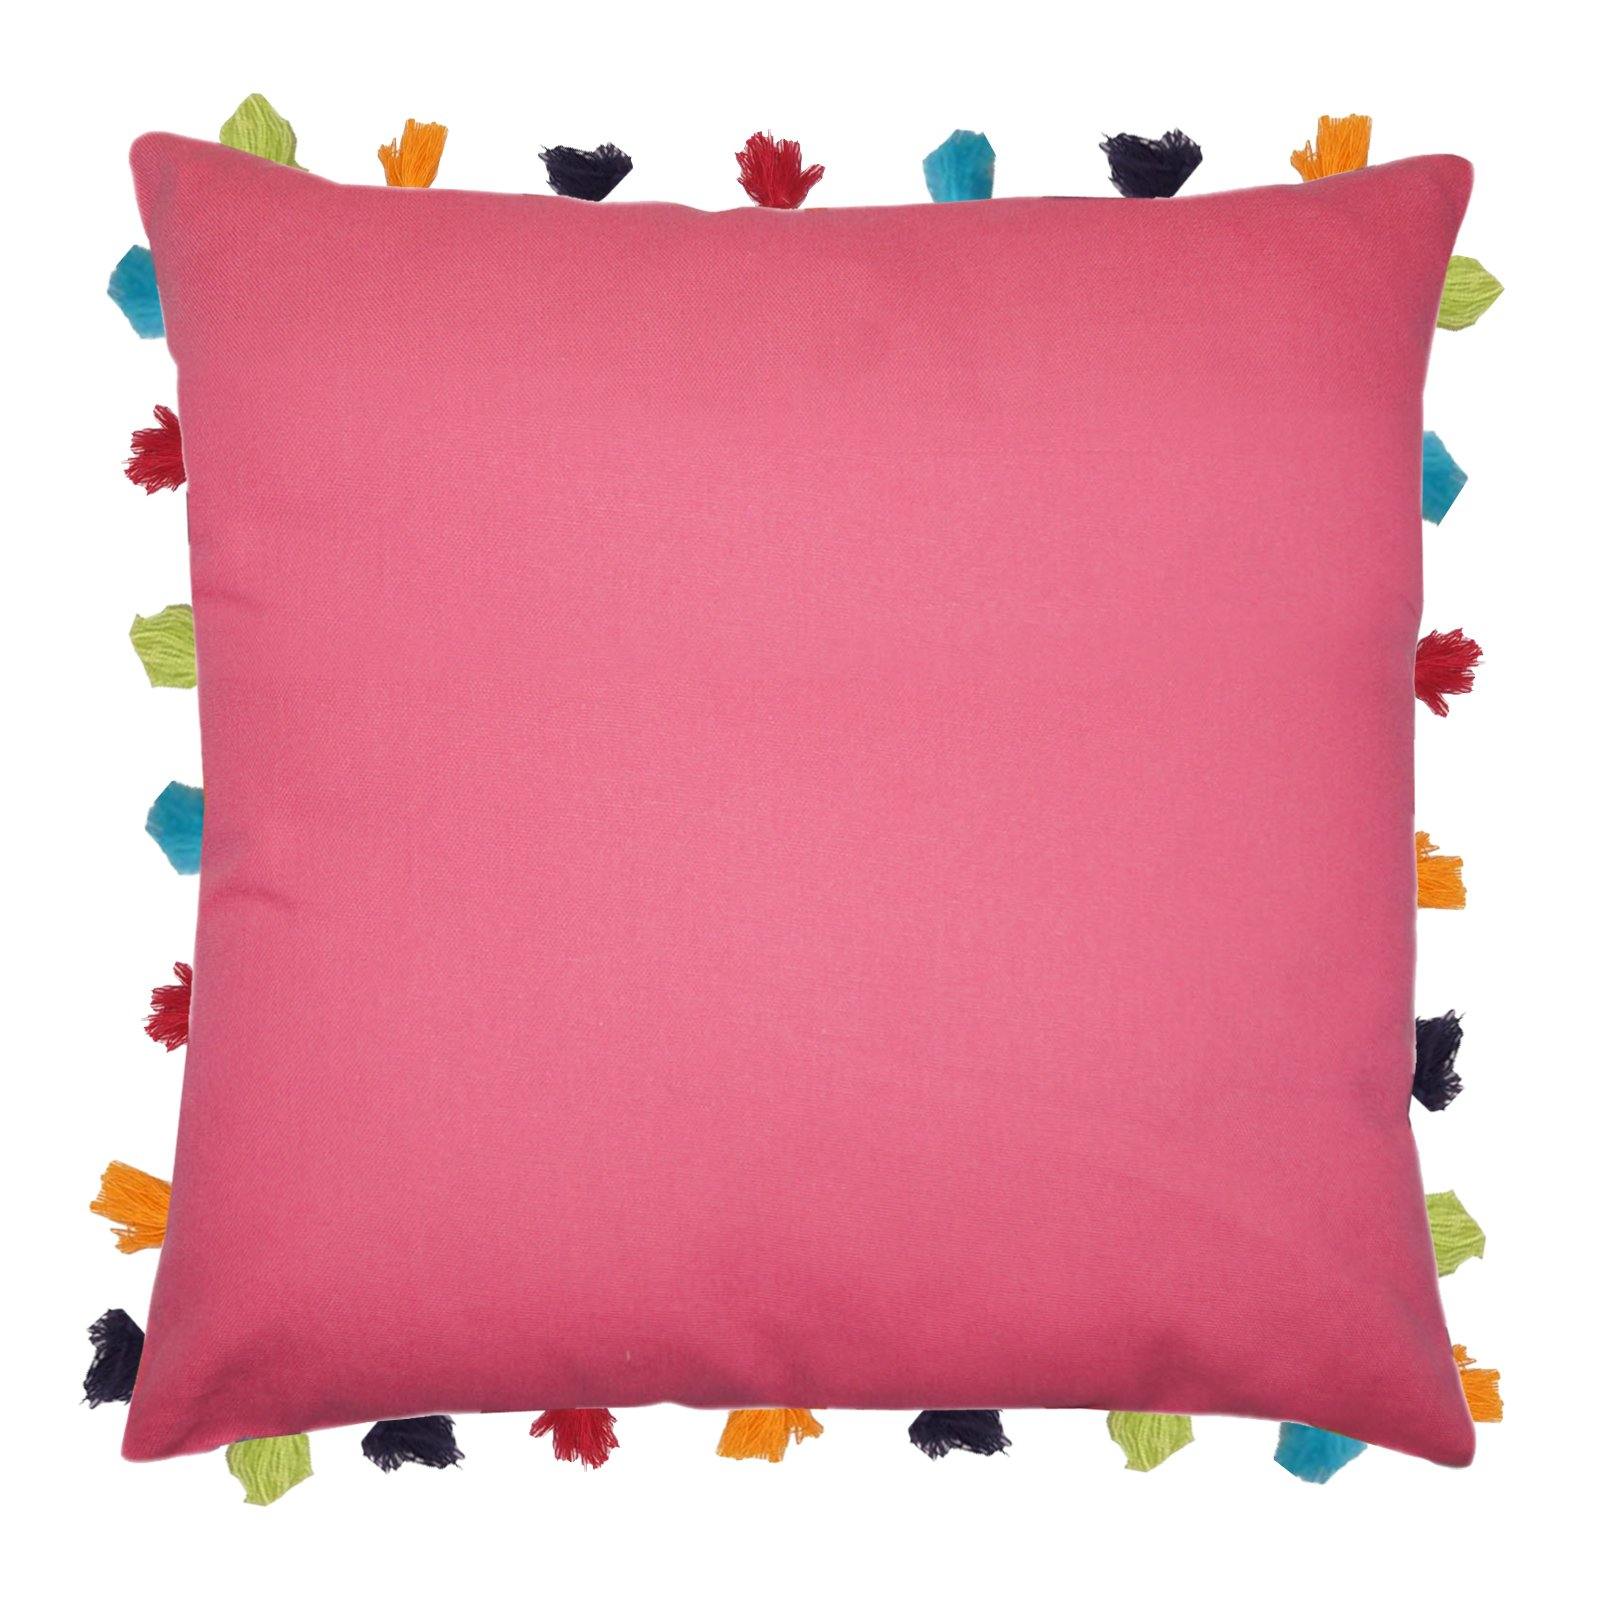 Lushomes Rasberry Cushion Cover with Colorful tassels (Single pc, 20 x 20”) - Lushomes